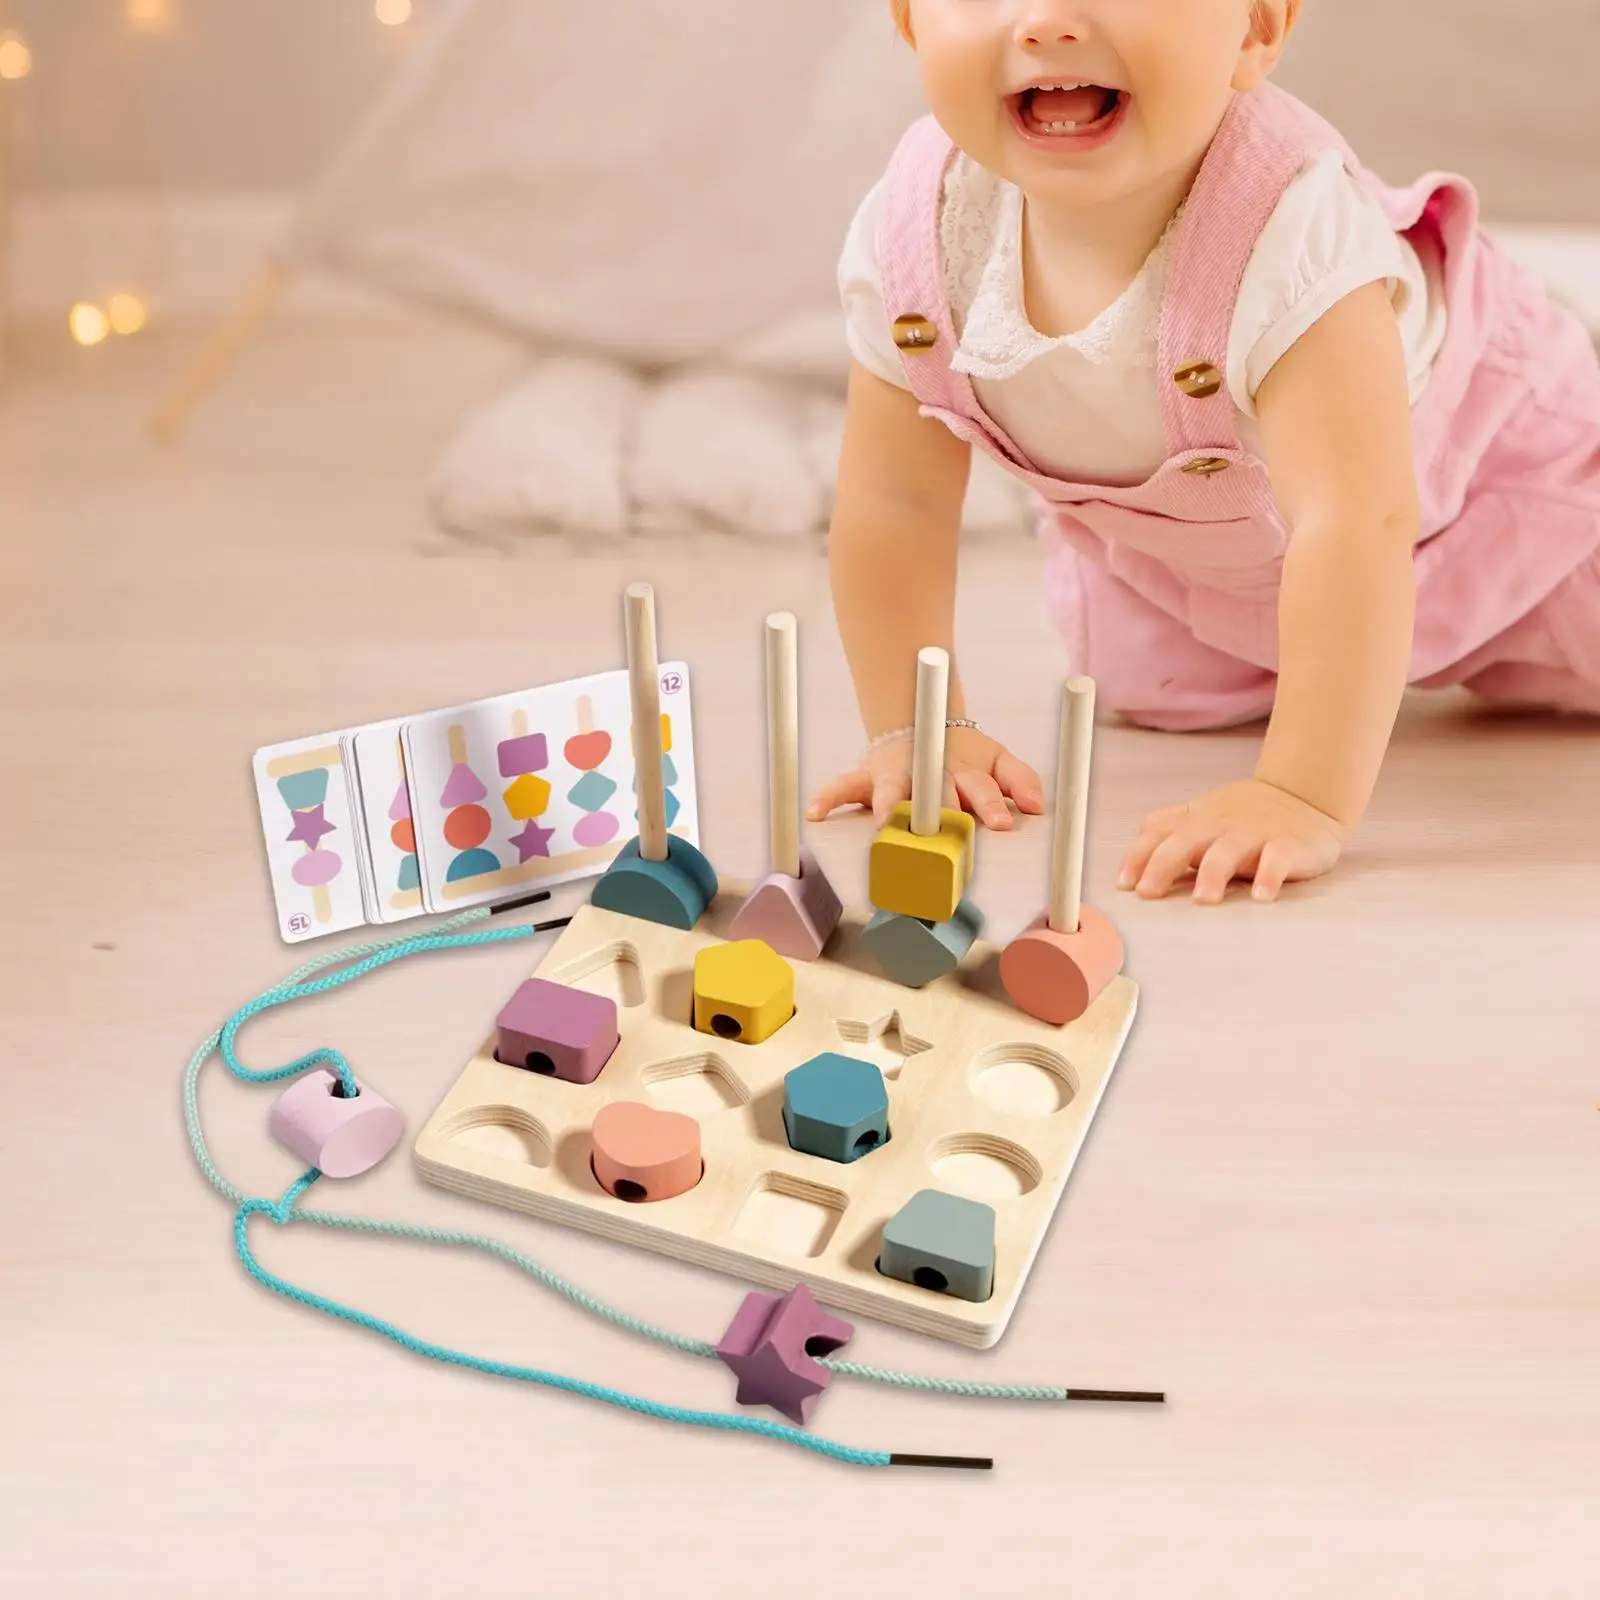 

Beads Sequencing Toy Sorting Threading Blocks Color Recognition Geometry Pairing for Kids 2 3 4 5 Holiday Gifts Preschool